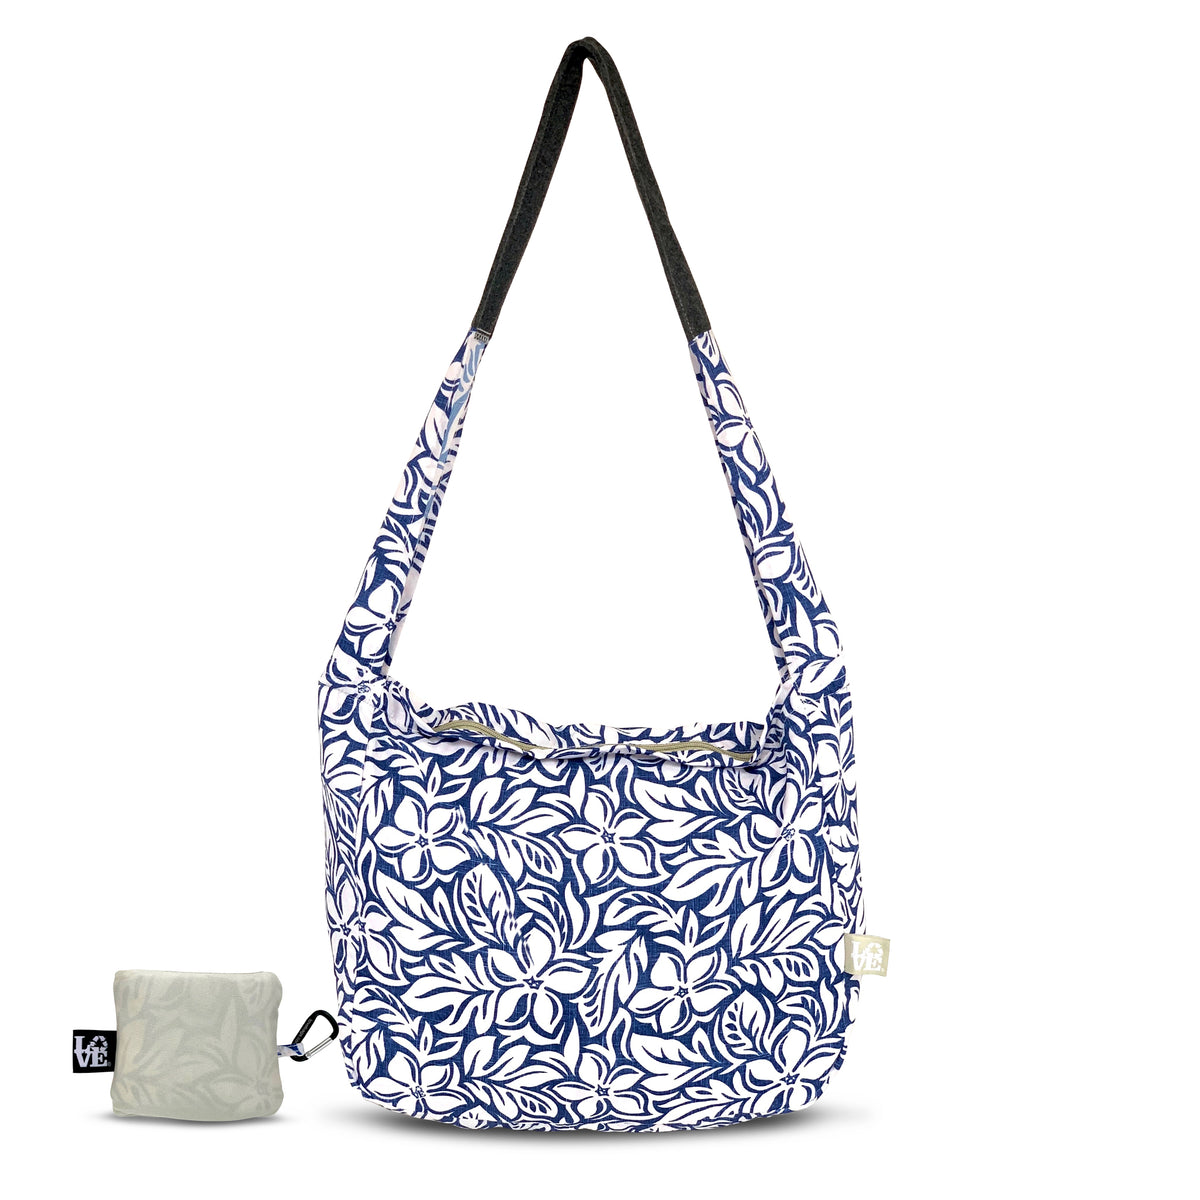 CROSSBODY STASH IT Tote Bag - BLUE HAWAII (WITH EXTRA LONG STRAP)